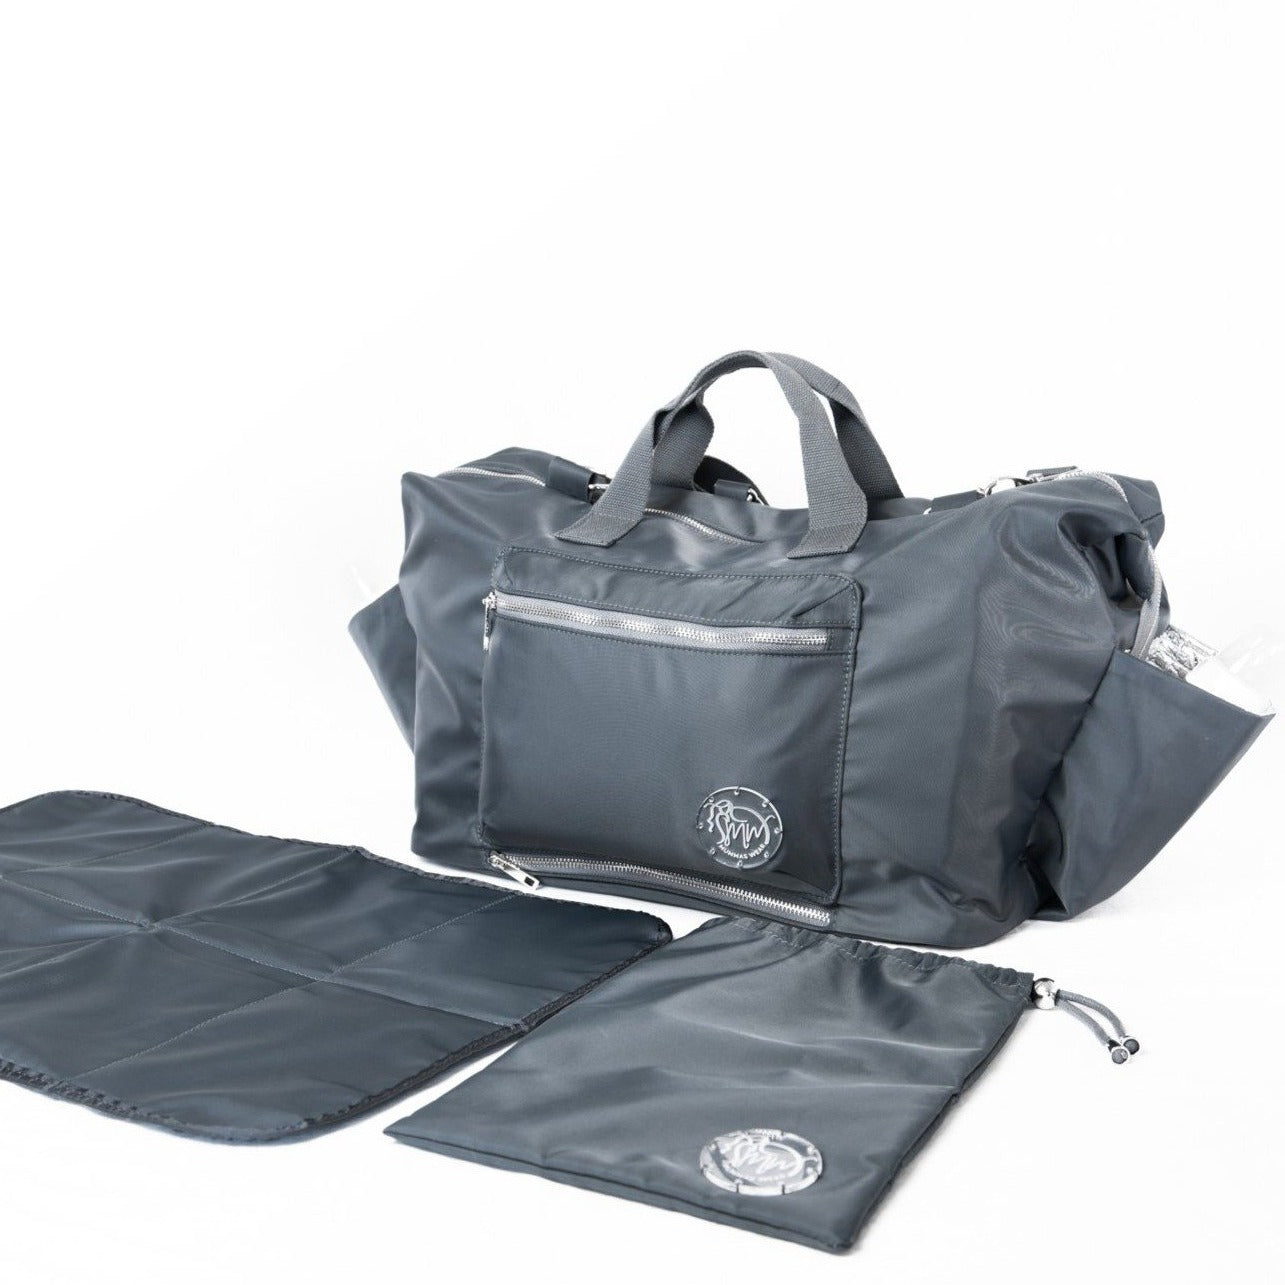 alt="The DUFFLE Nappy Bag with change mat and Oopsie Daisy Wet Bag. All in Chaos + Calm (charcoal grey)"